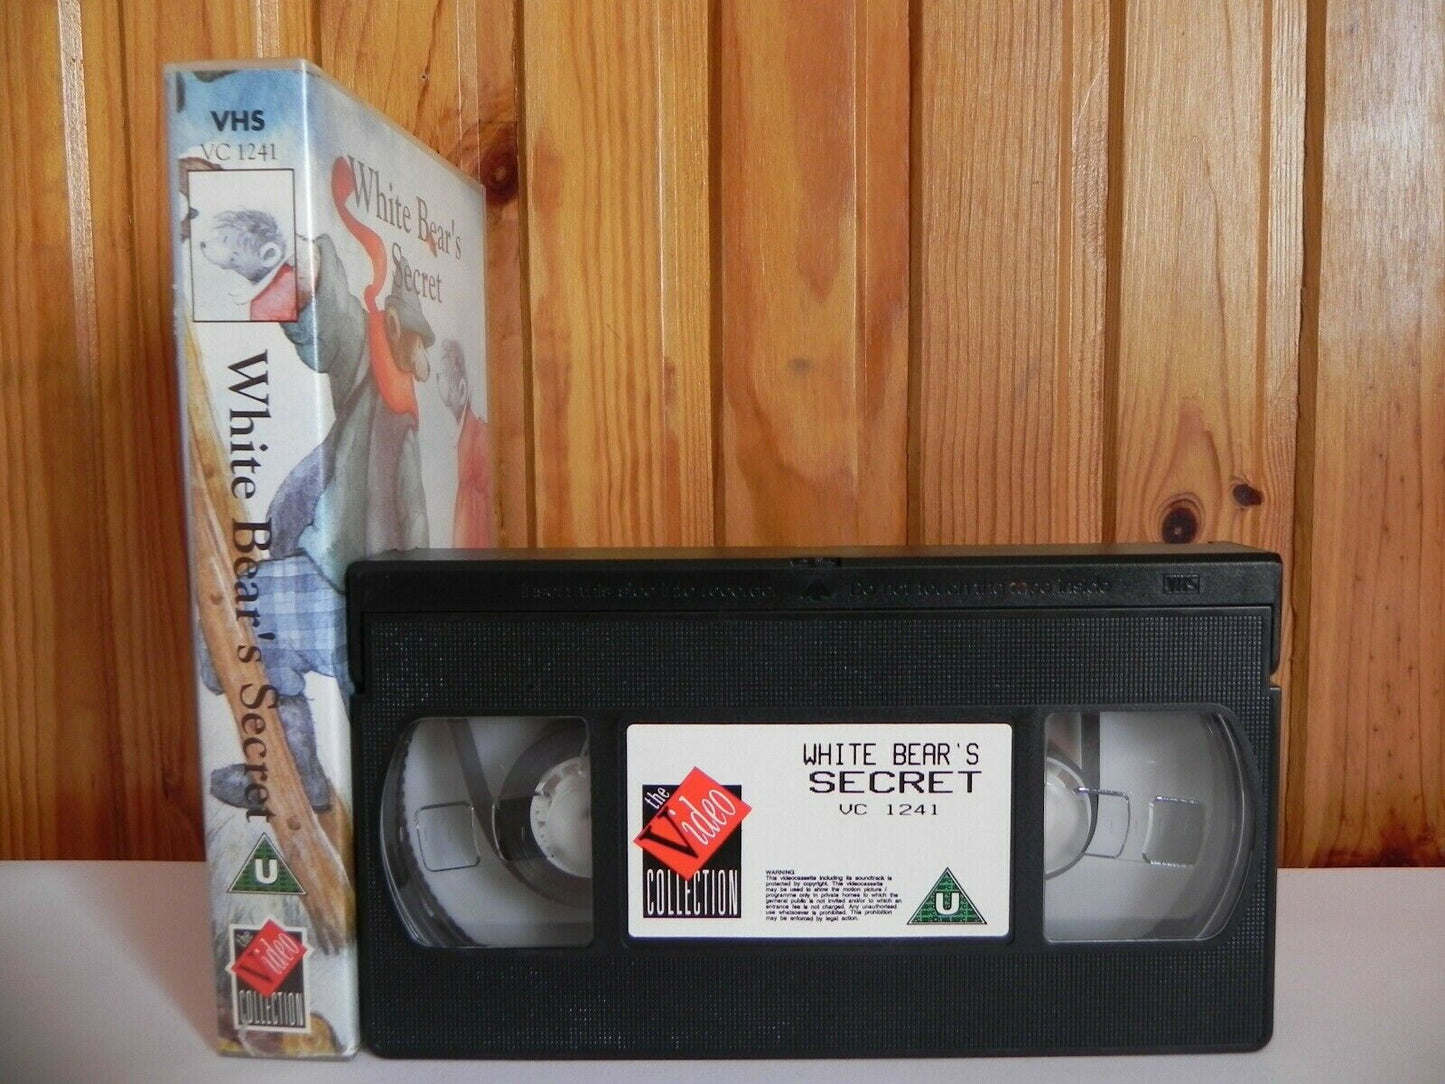 White Bear's Secret - The Video Collection - Animated - Children's - Pal VHS-